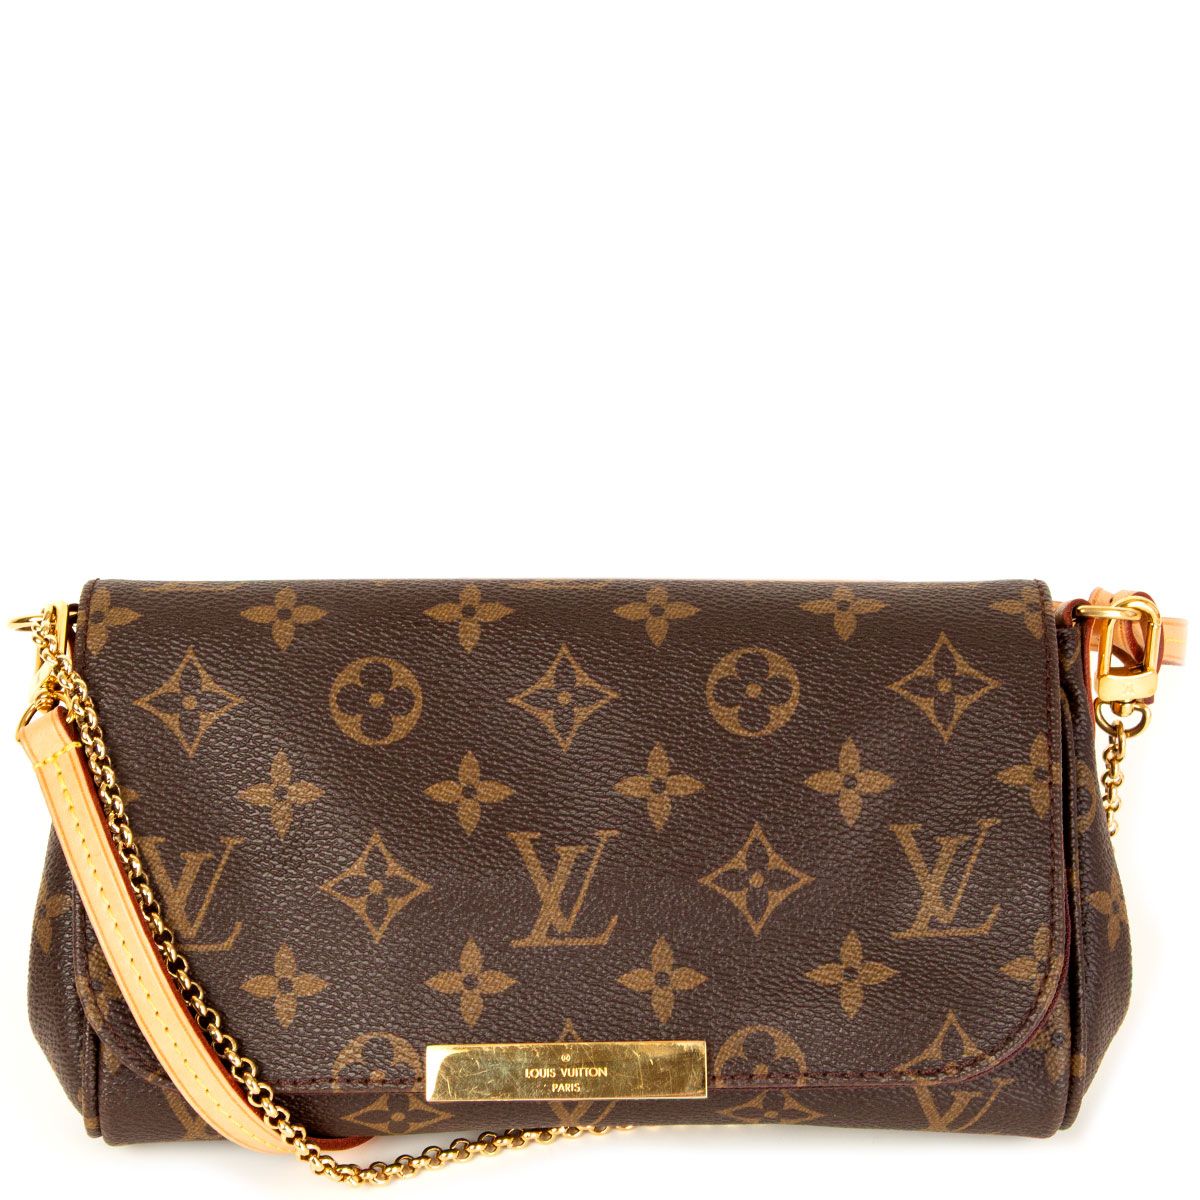 Louis Vuitton Favorite MM vs PM  Monogram vs Damier Ebene  Which is the  best one  YouTube